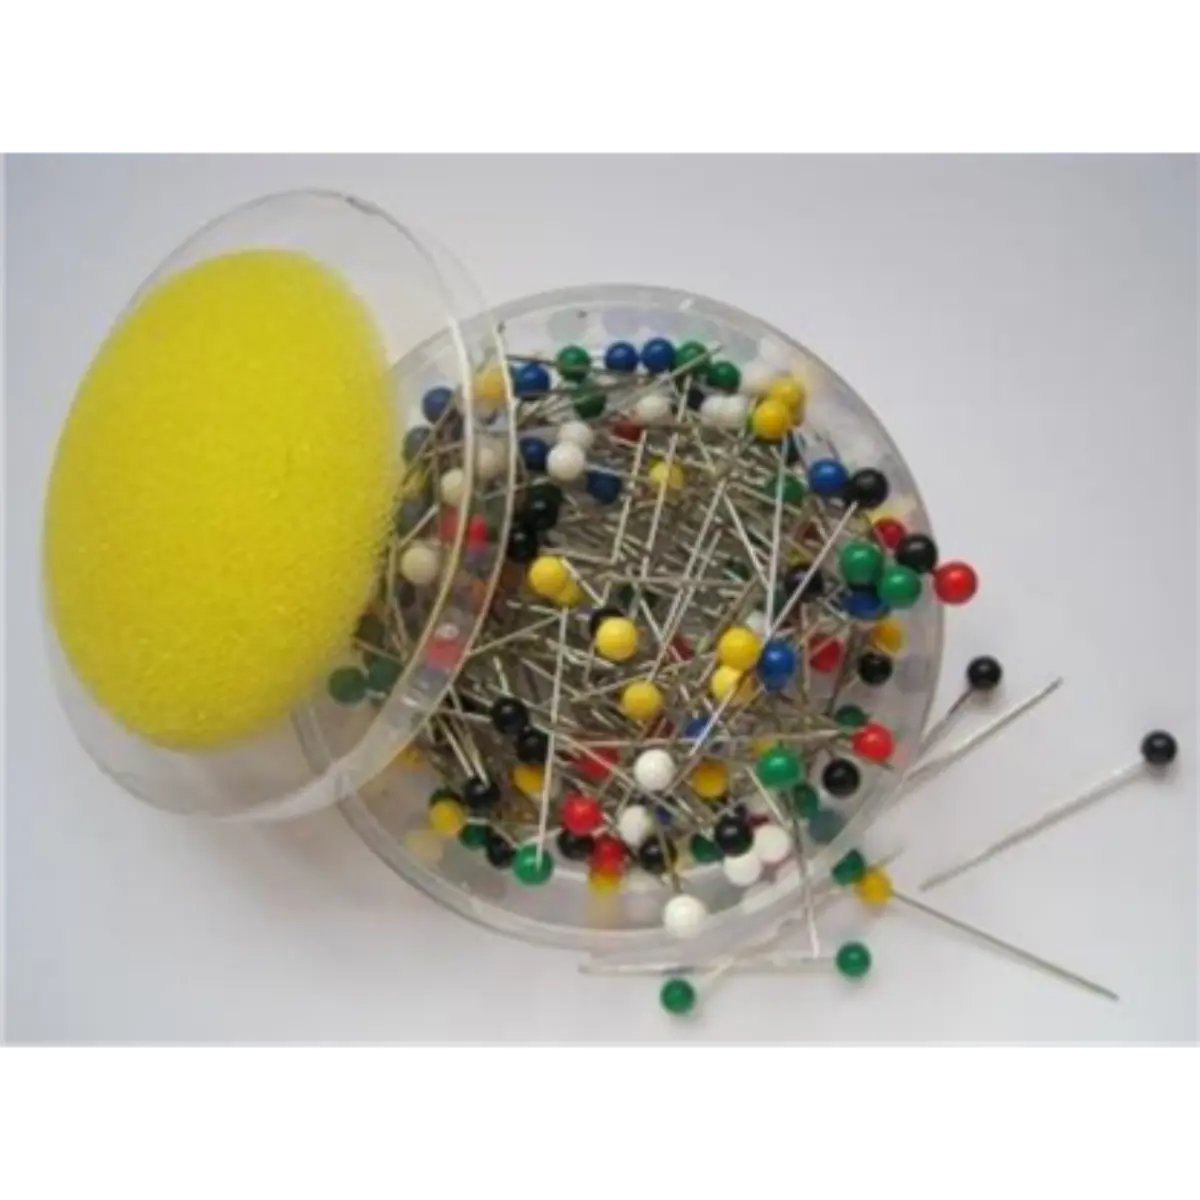 Coloured Headed Dress Pins | Craft, Tailoring, Designing, Dressmaking, Sewing